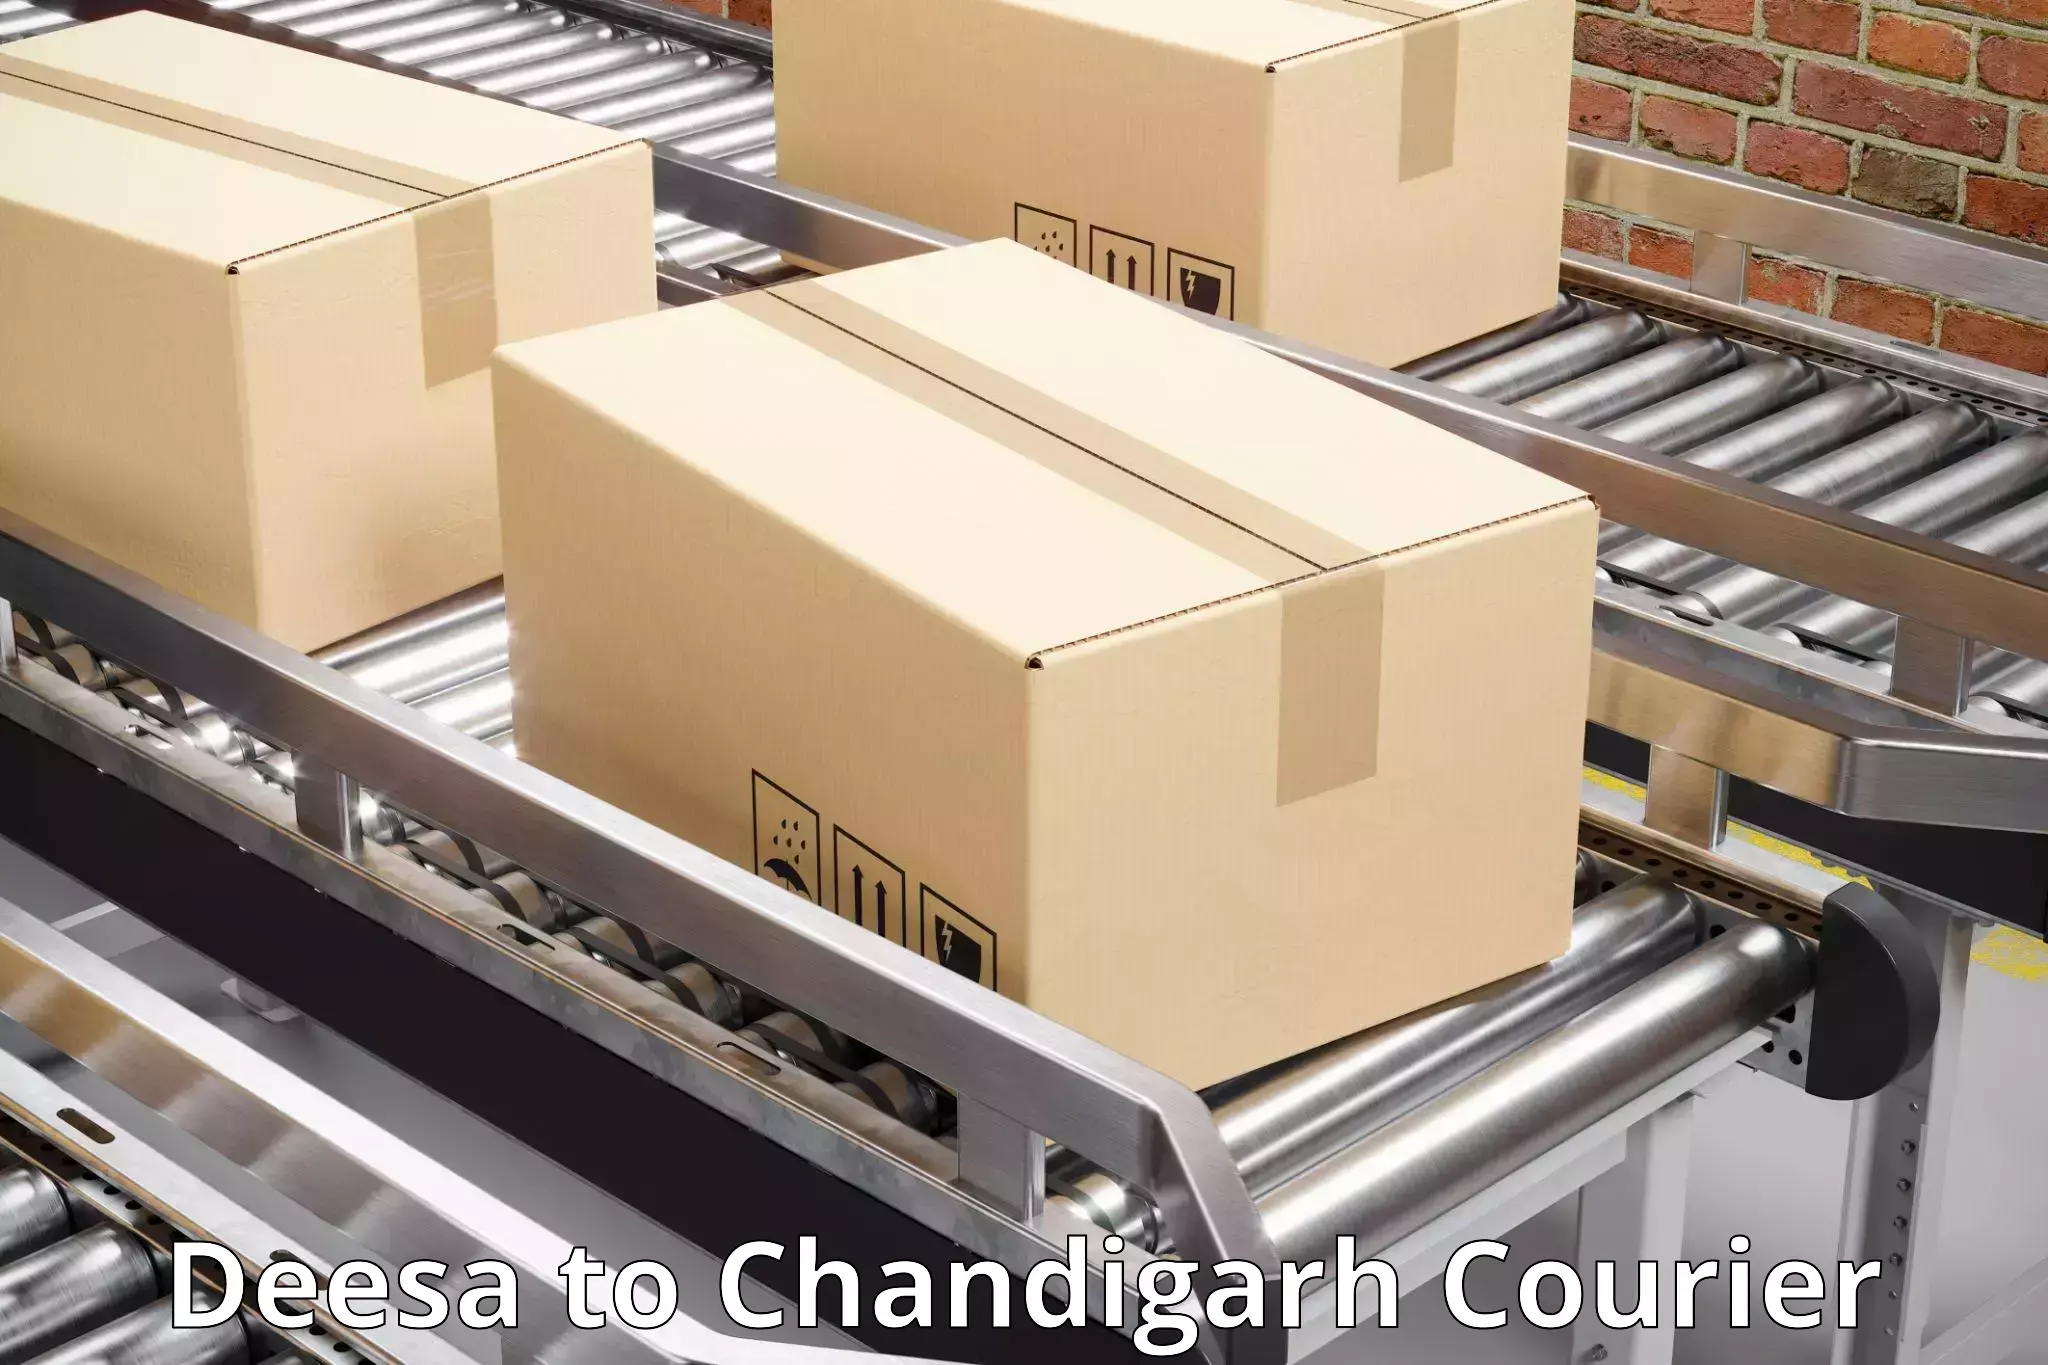 Customer-oriented courier services Deesa to Chandigarh